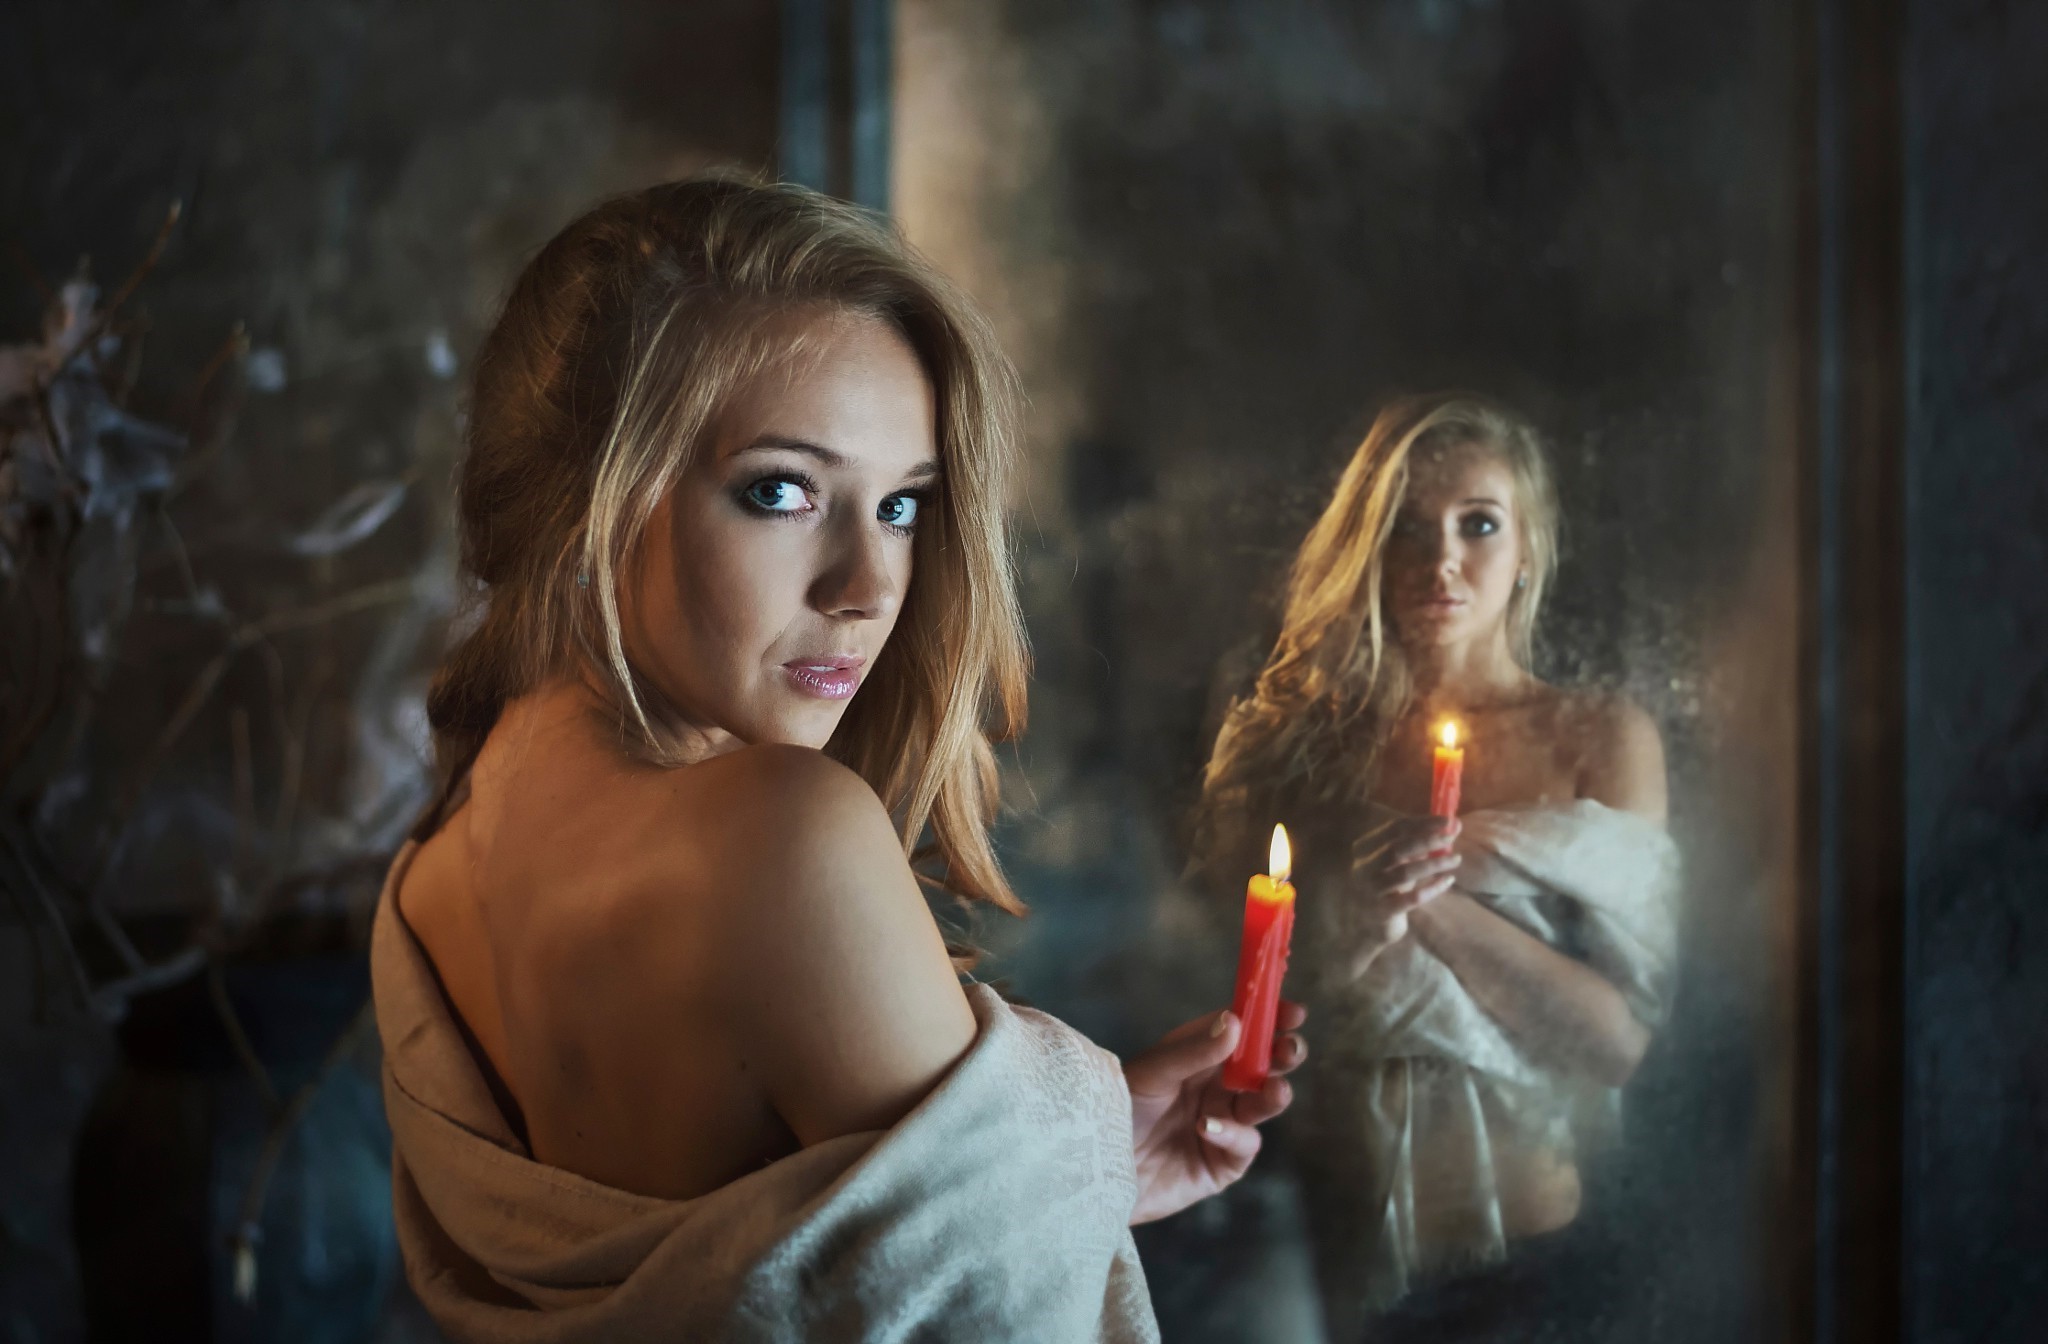 women, Model, Blonde, Long Hair, Looking At Viewer, Bare Shoulders, Blue Eyes, Open Mouth, Face, Dasha Shovkoplyas, Candles, Mirror, Reflection Wallpaper